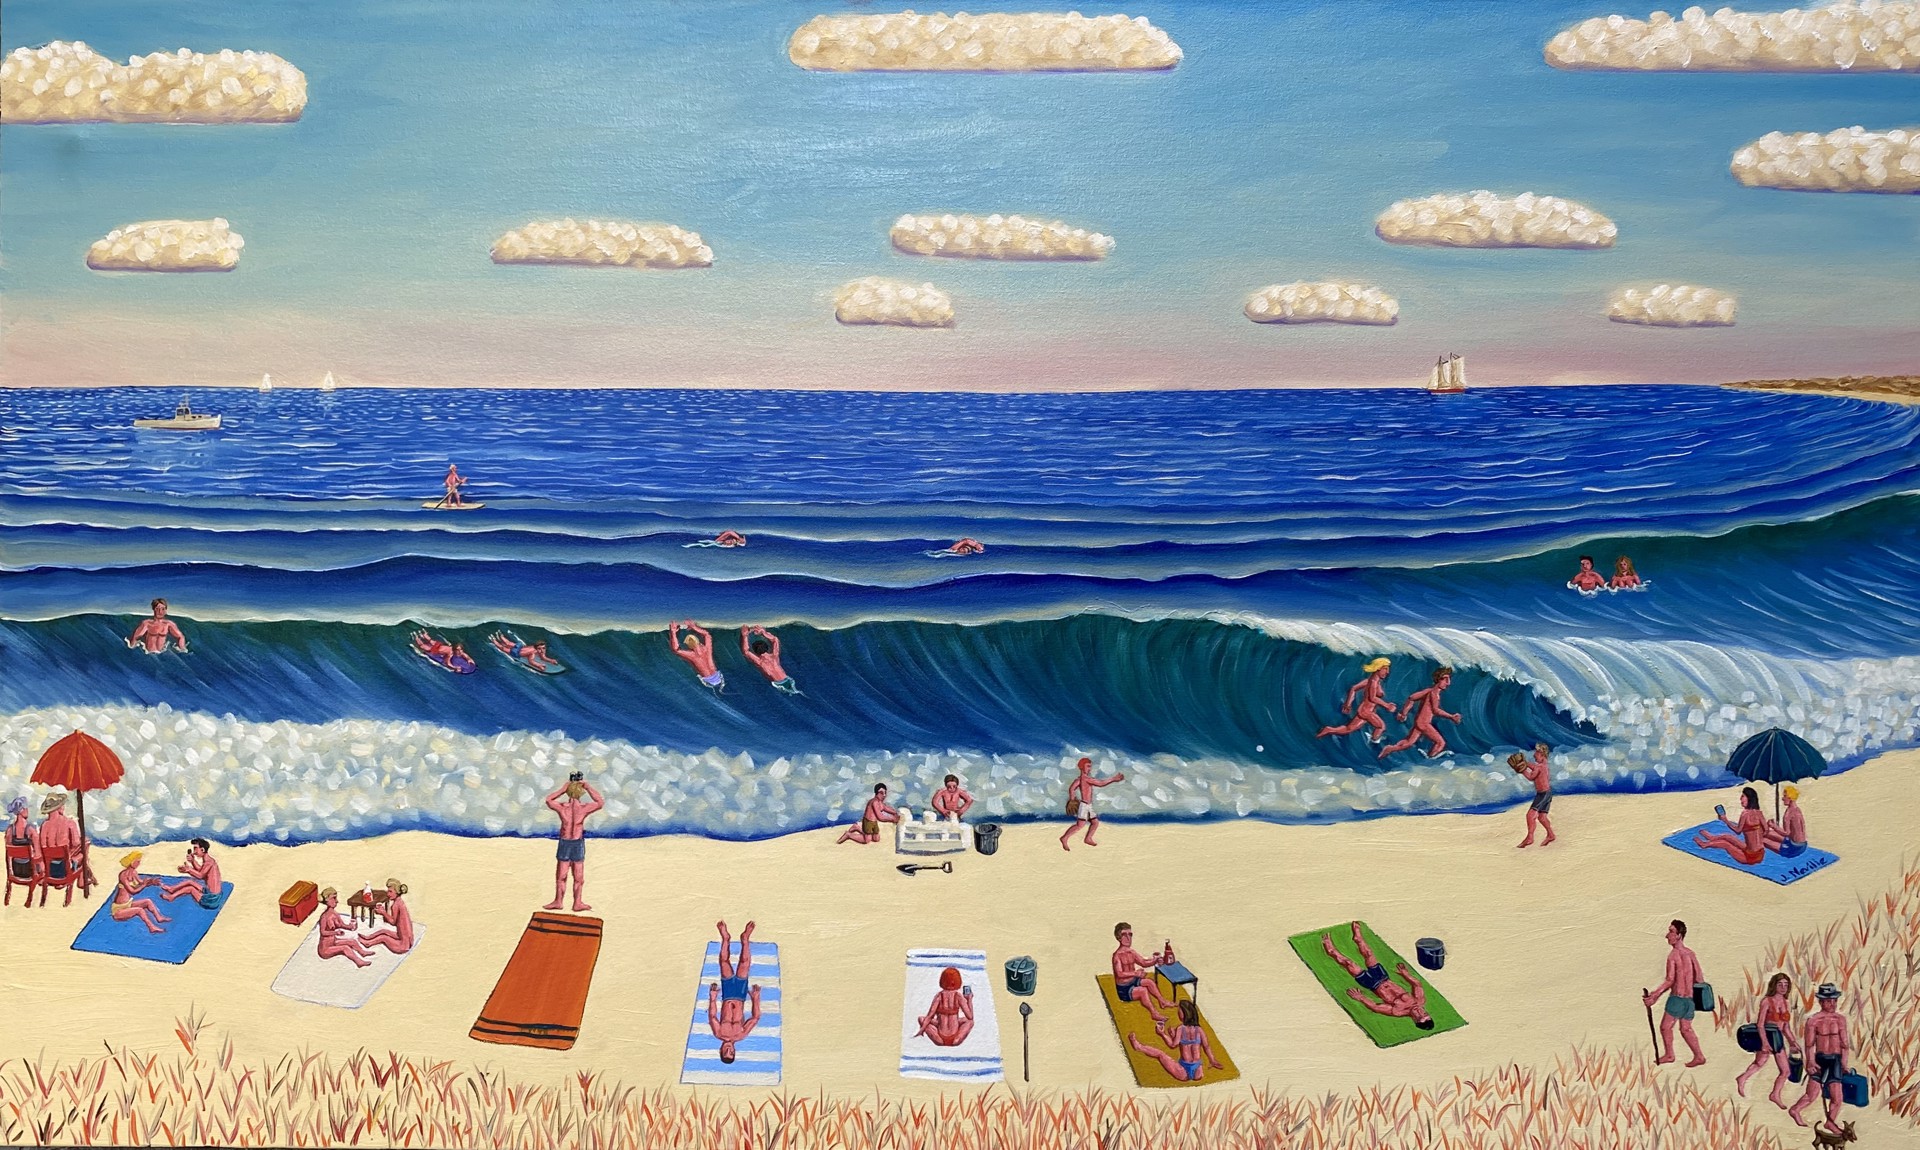 A Day at the Beach by John Neville